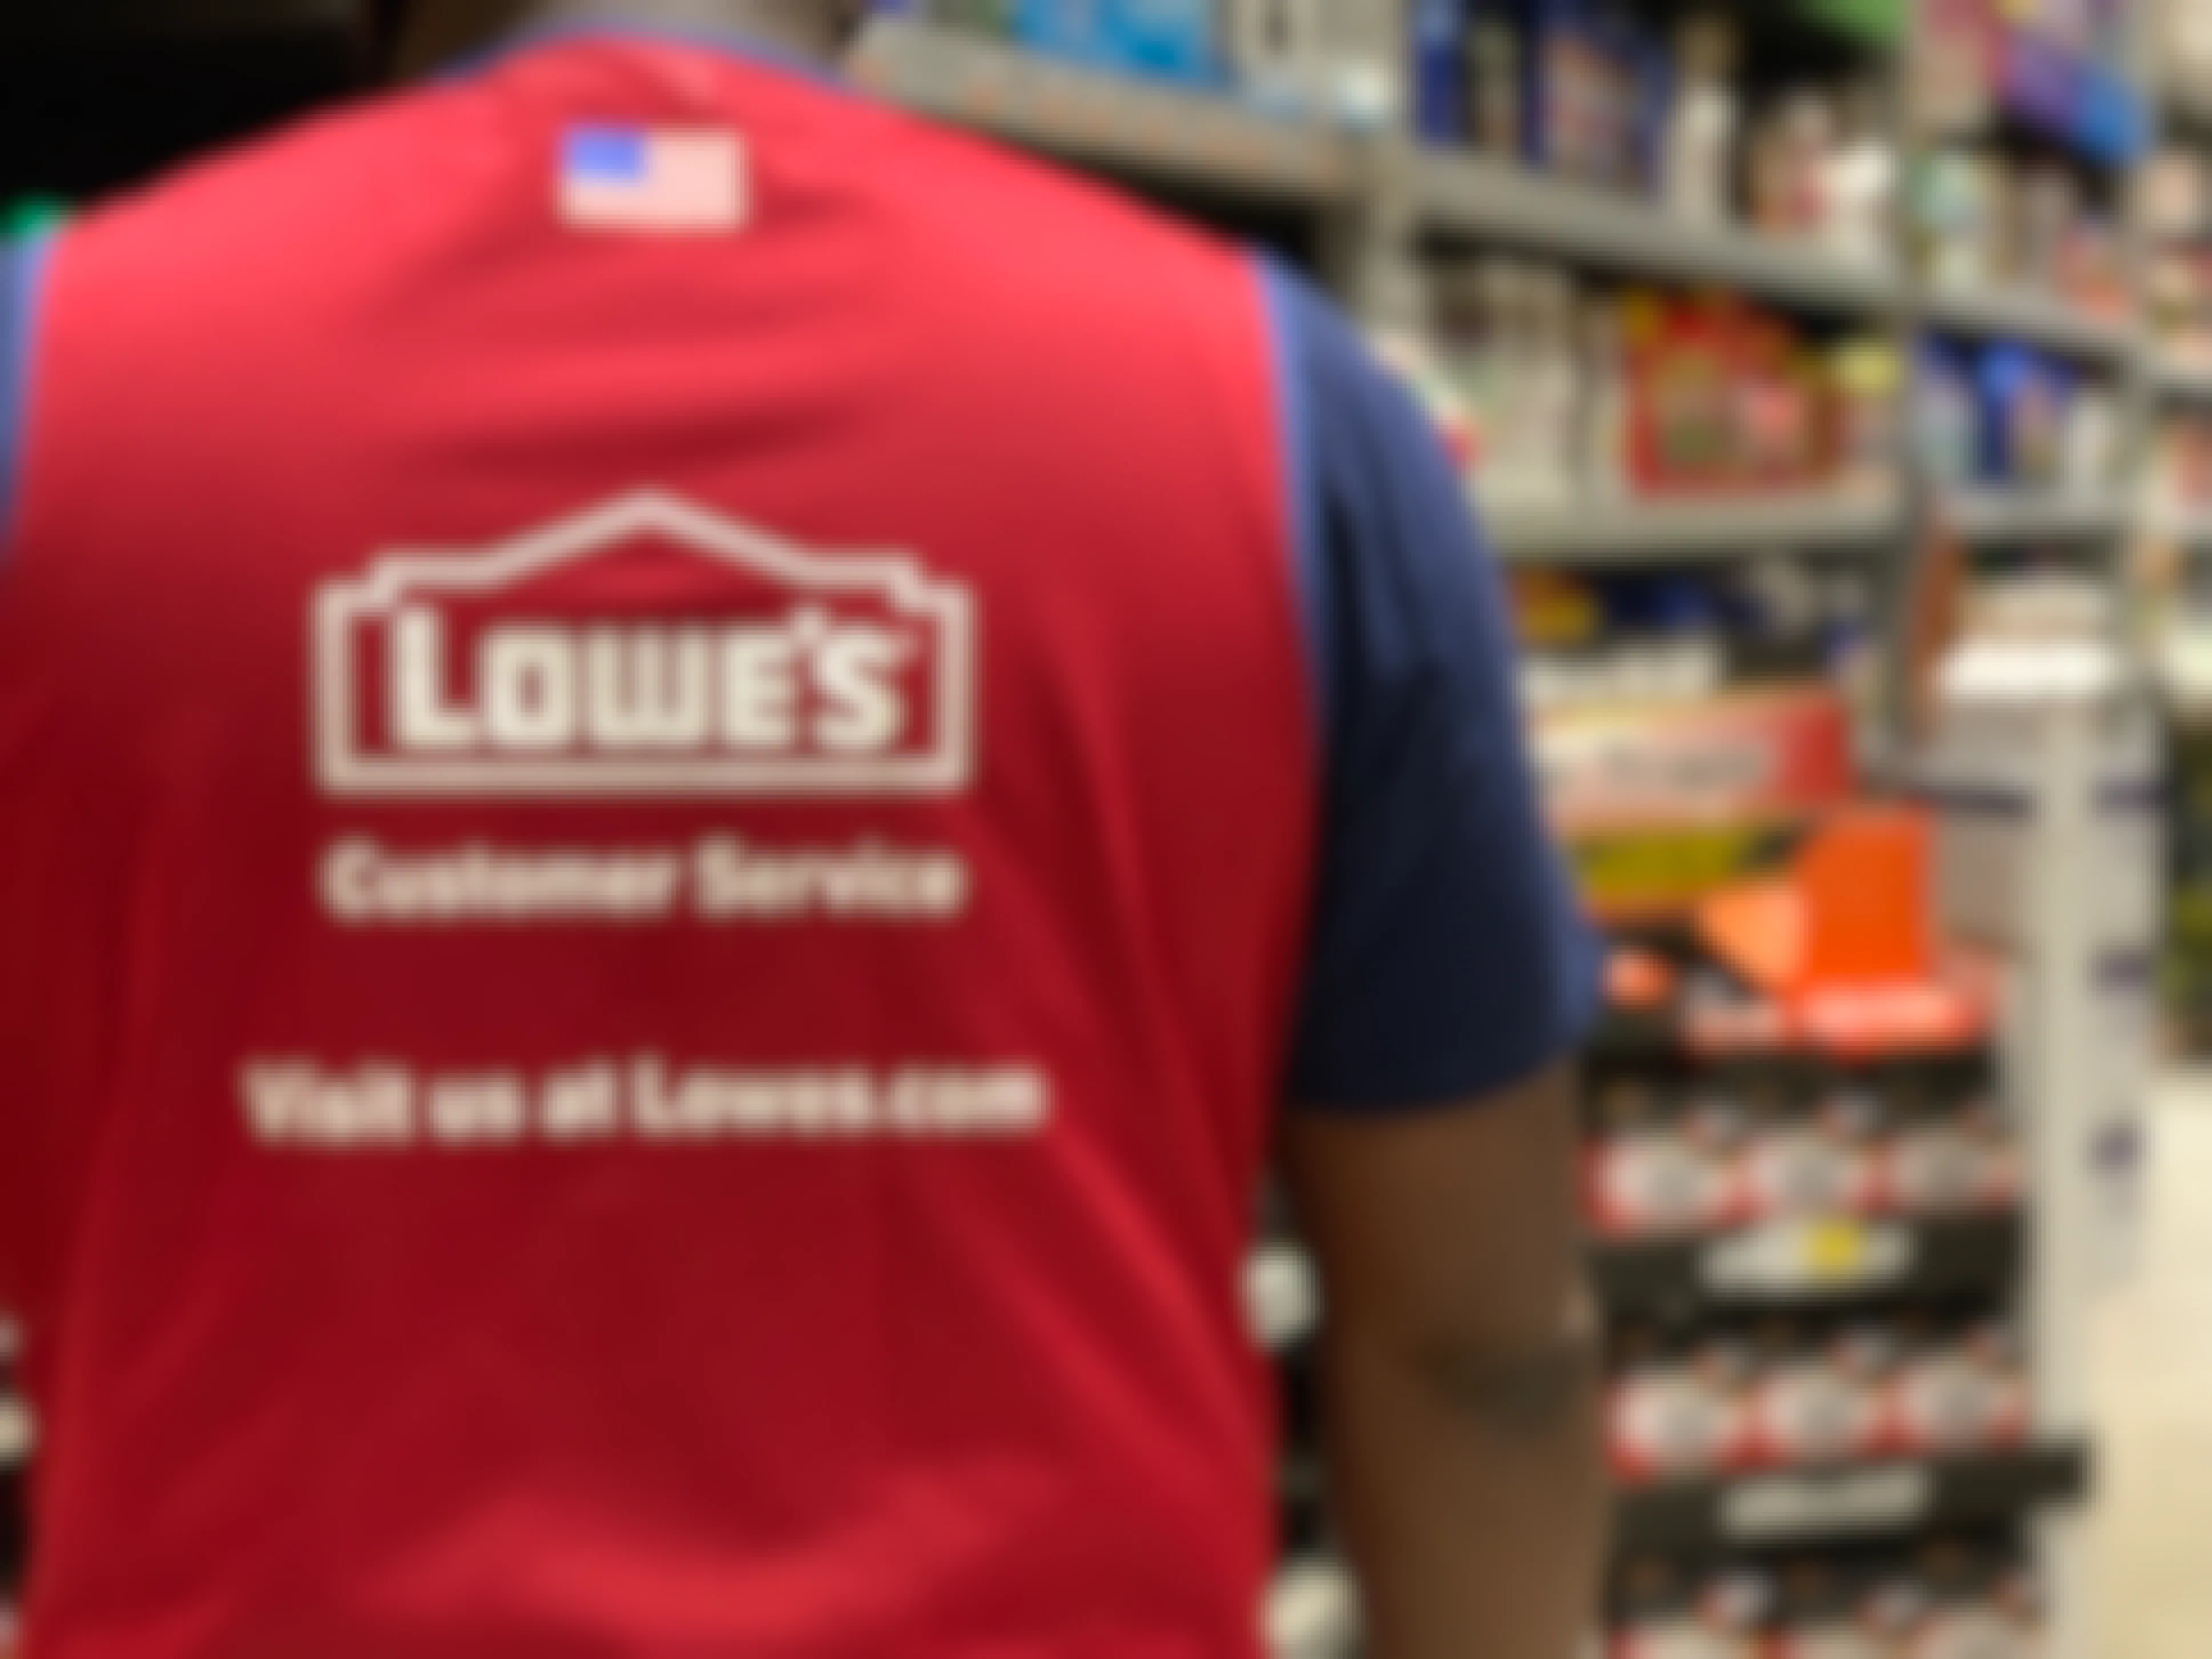 Lowes employee back in Lowes vest in store